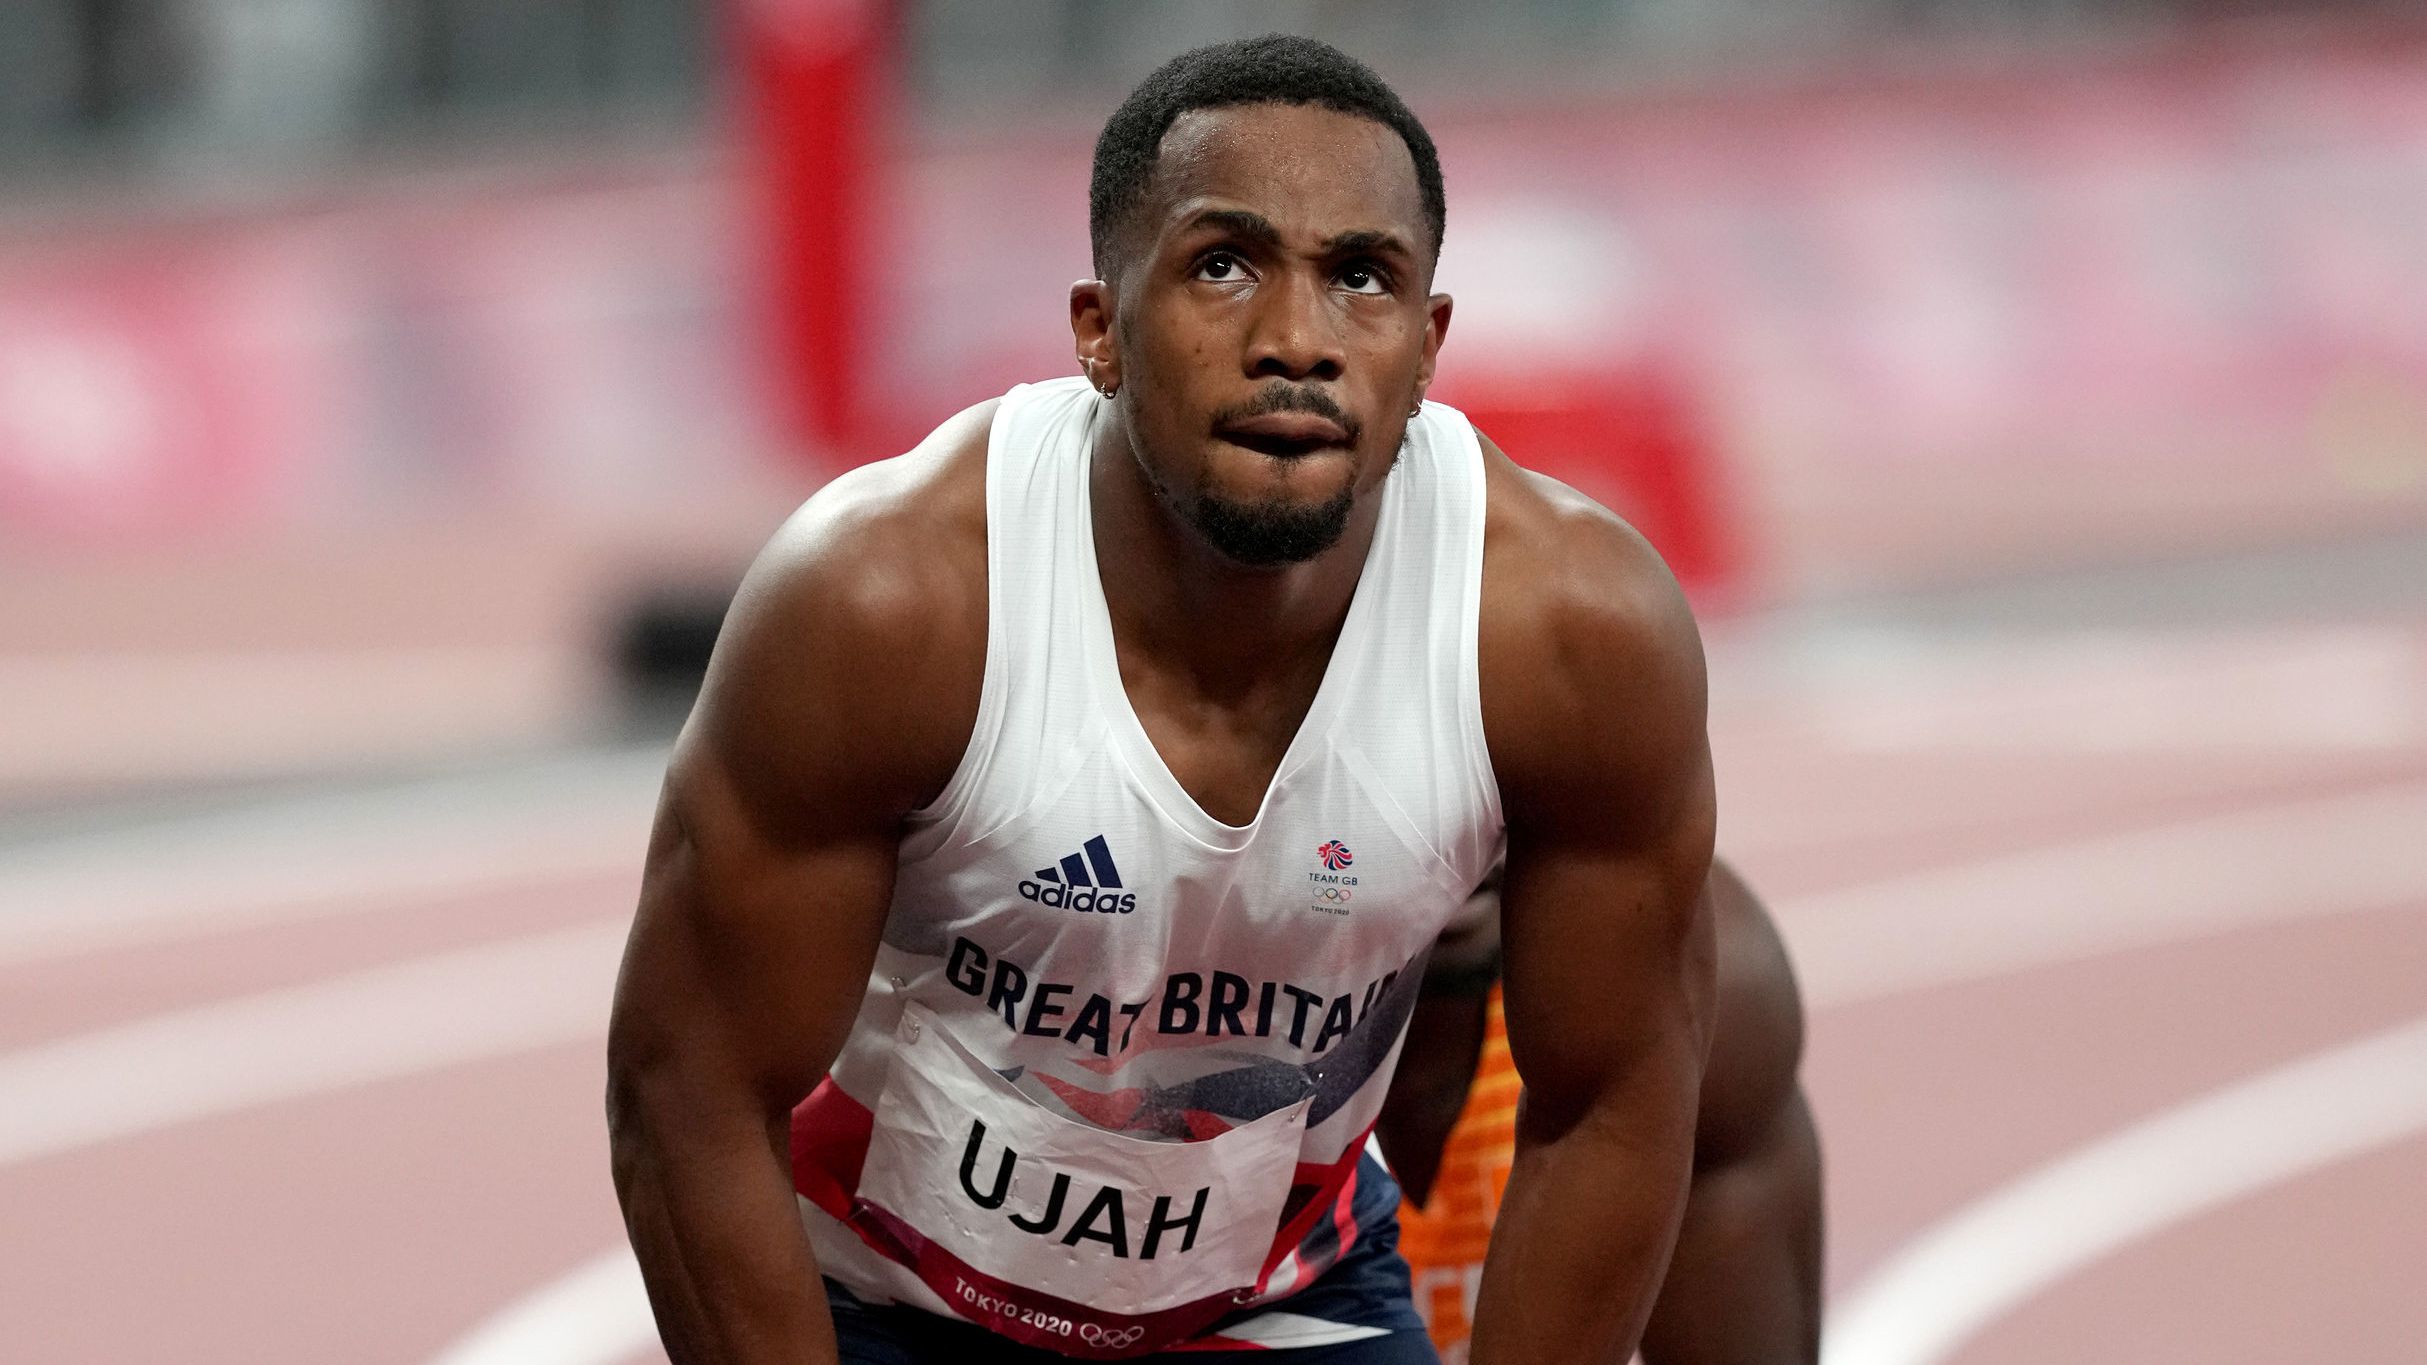 UK Athletics chief: The rules meant that we had to select Ujah